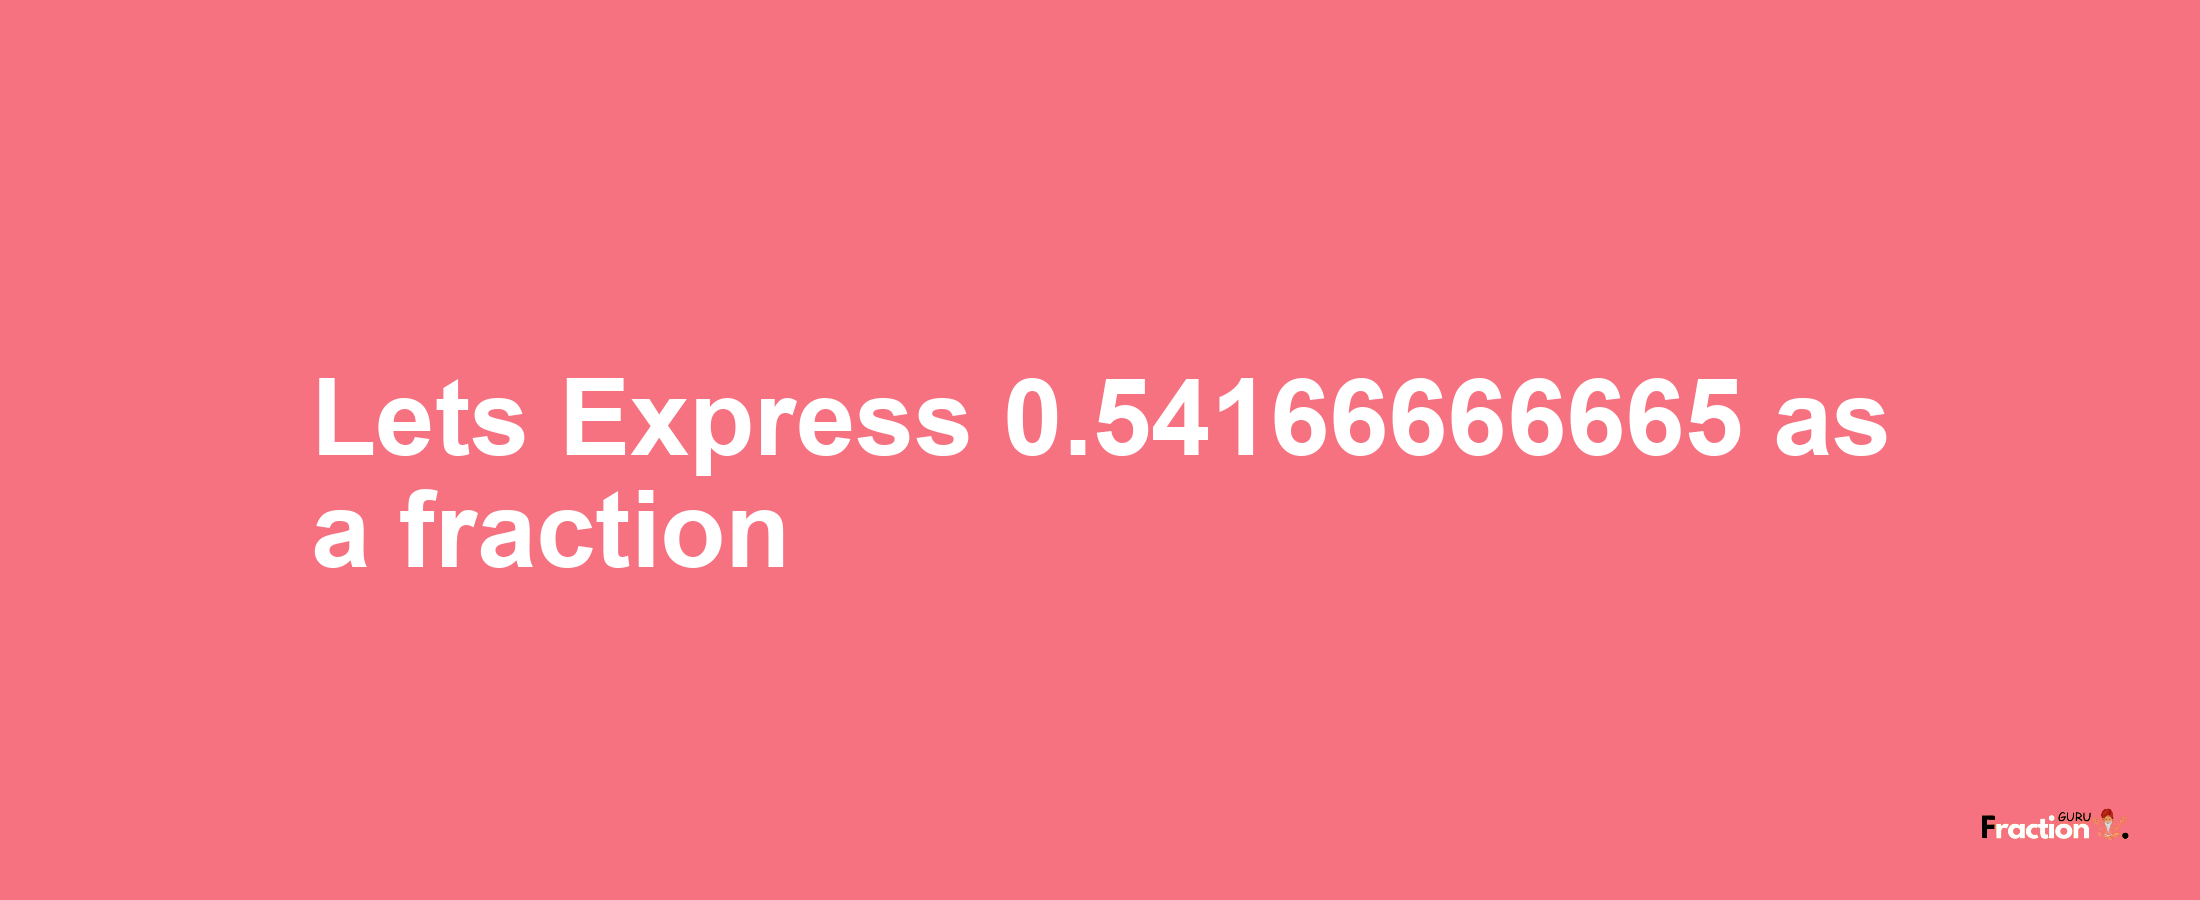 Lets Express 0.54166666665 as afraction